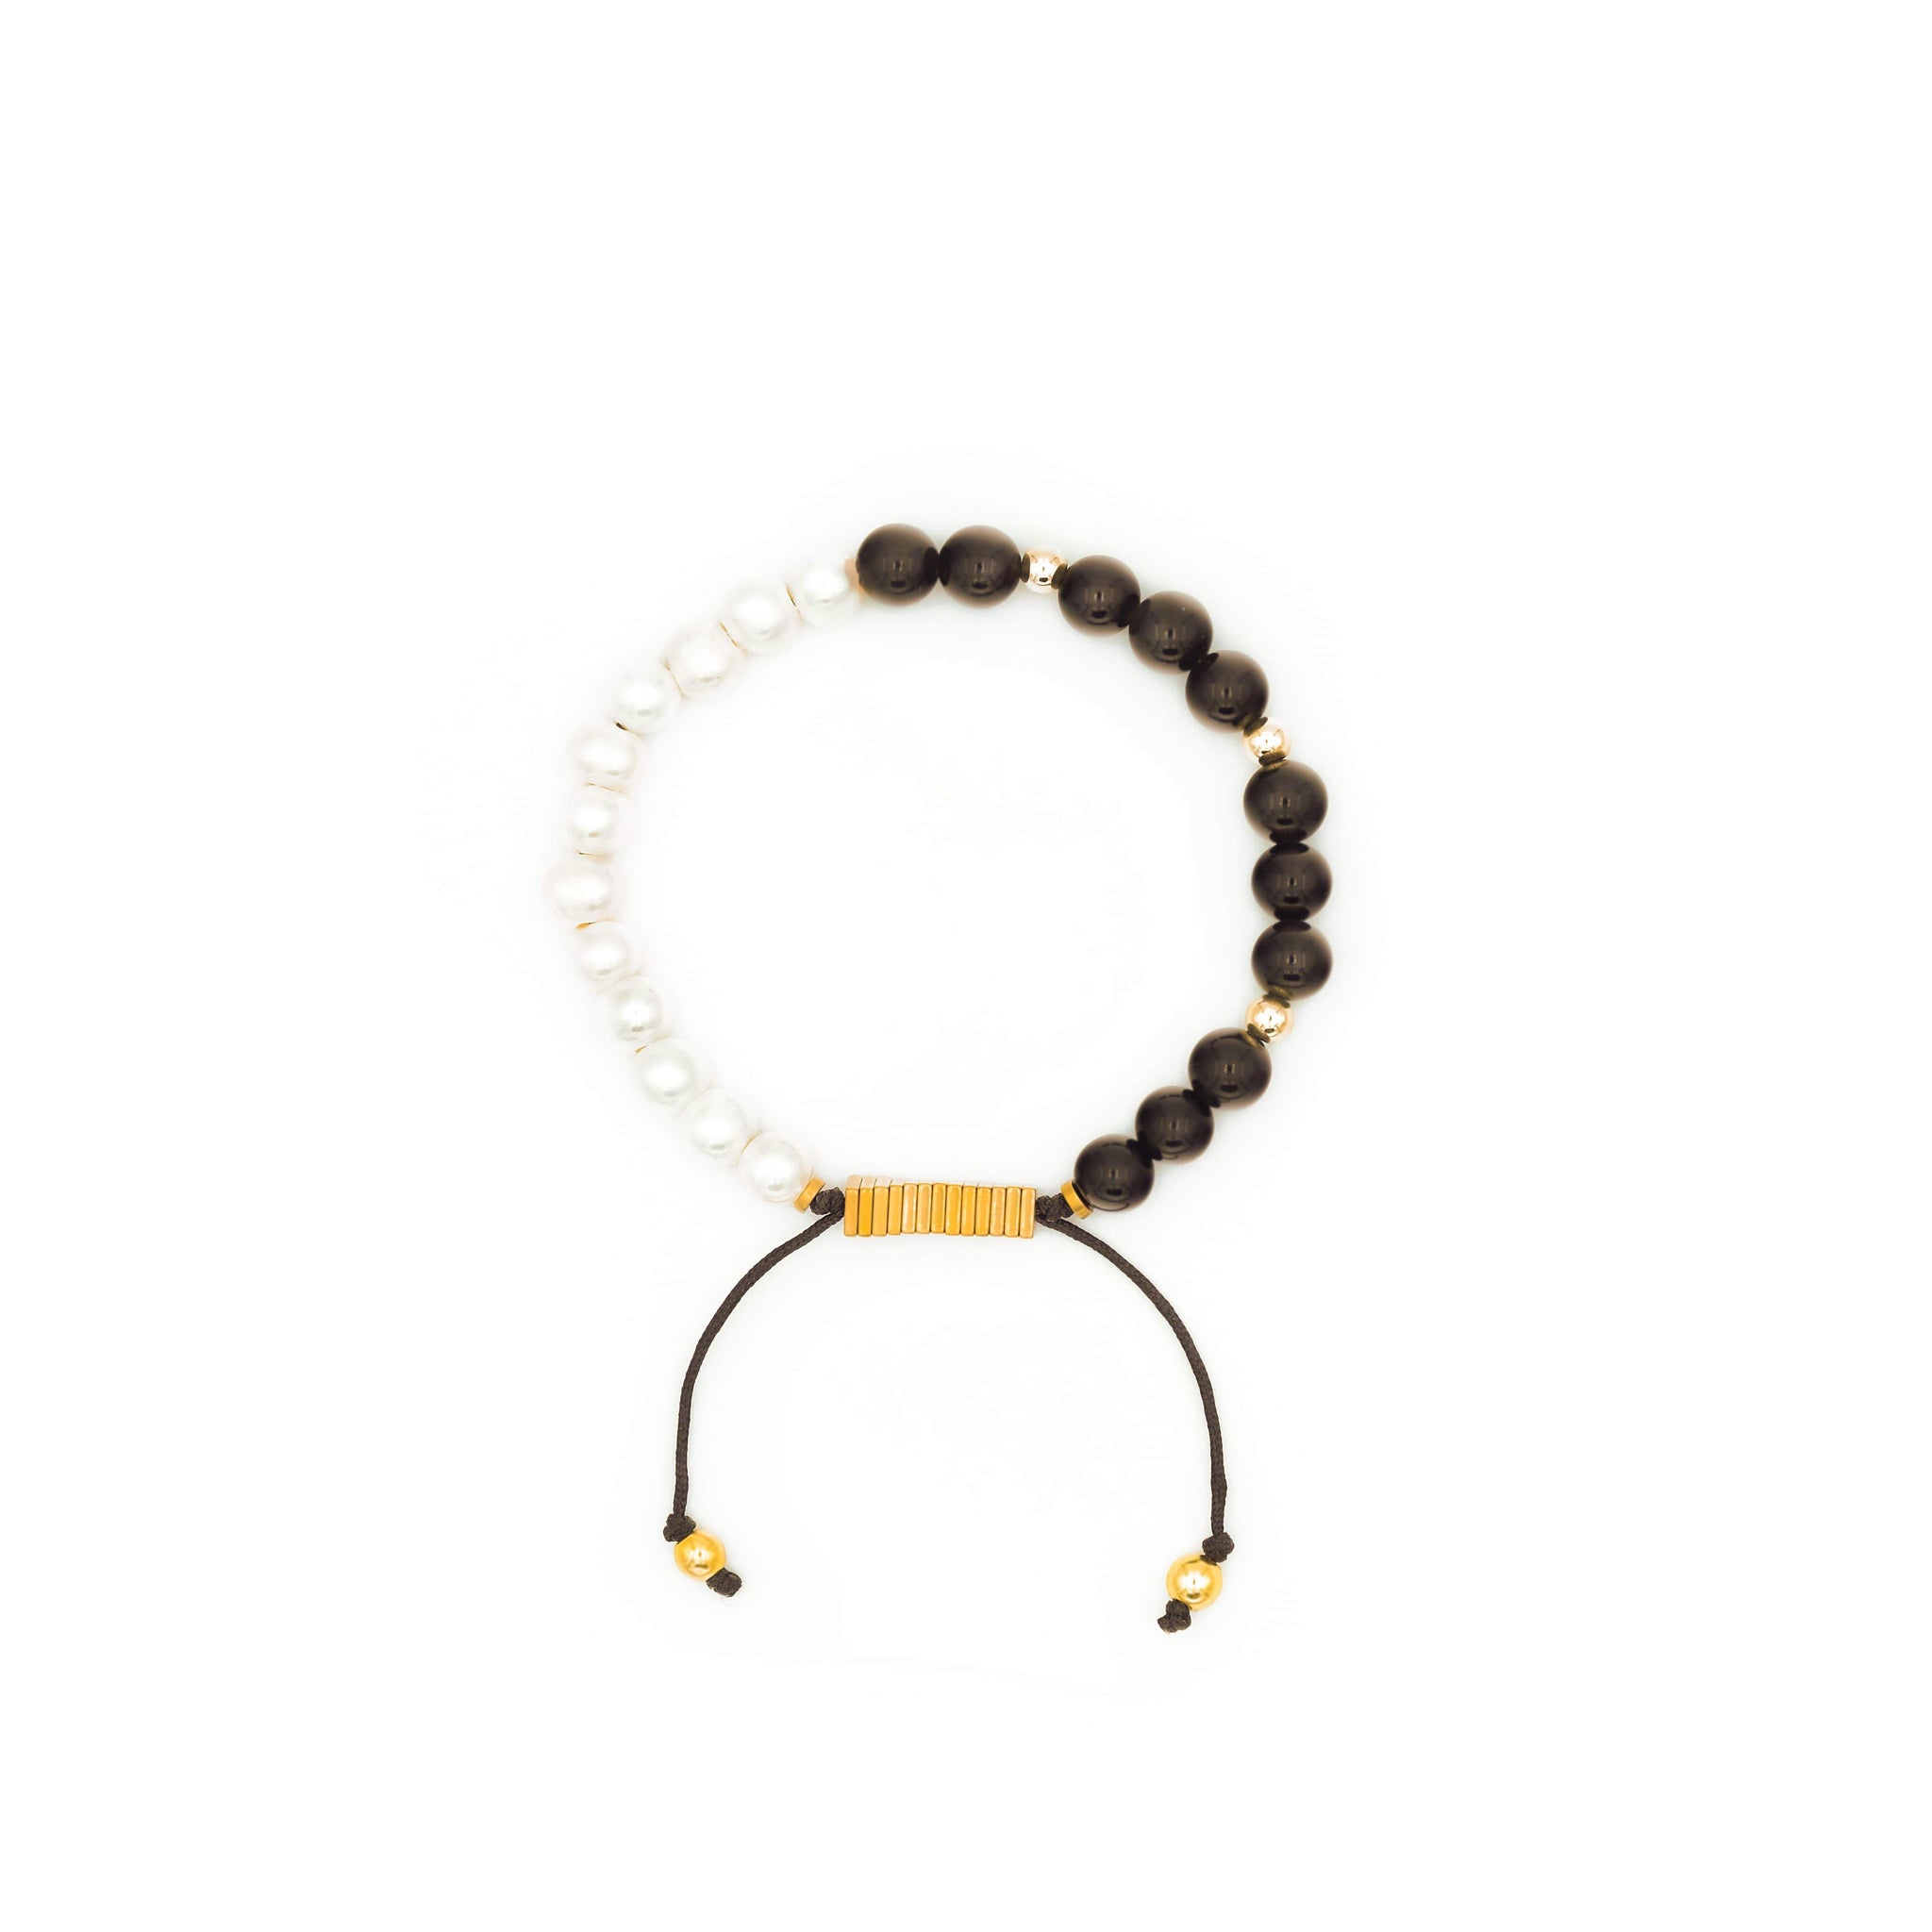 Handcrafted designer stone jewelry pearl black onyx bracelet with a cause charity - popvibe